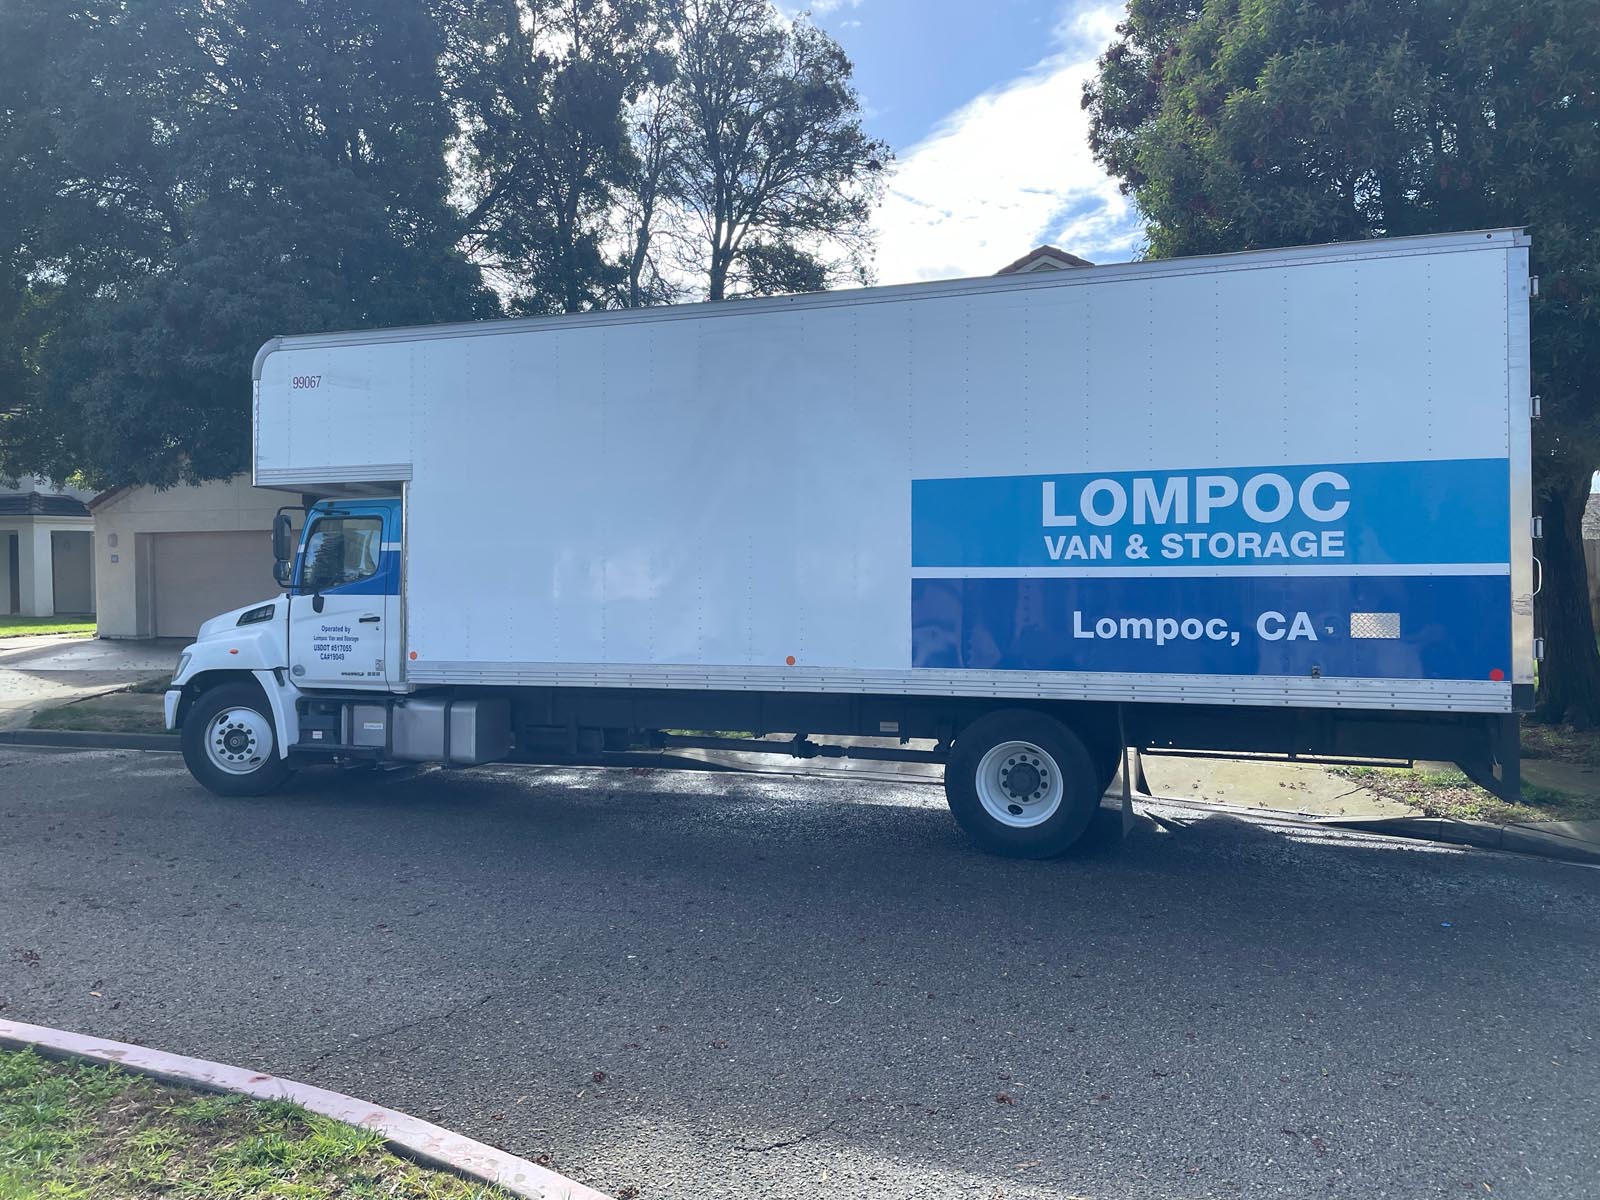 Lompoc truck in front of home